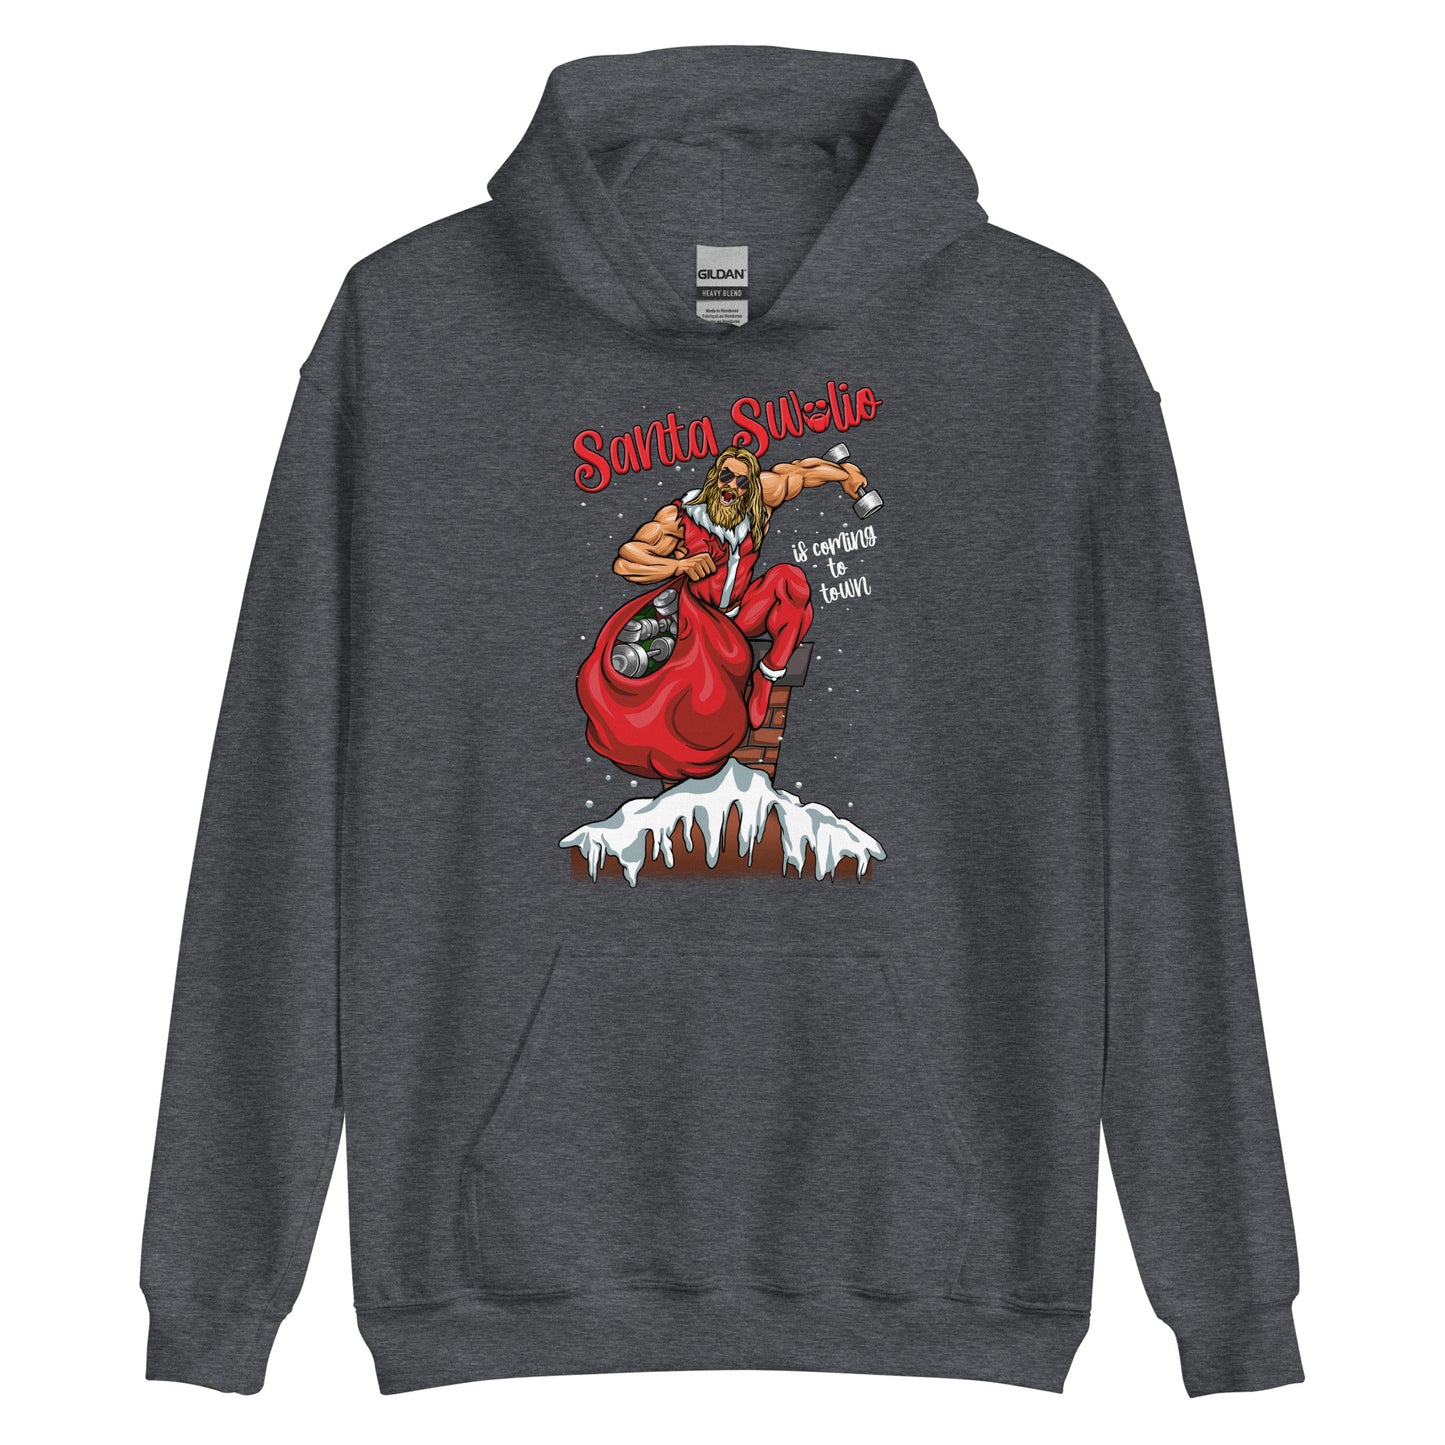 Santa Swolio Is Coming To Town Hoodie